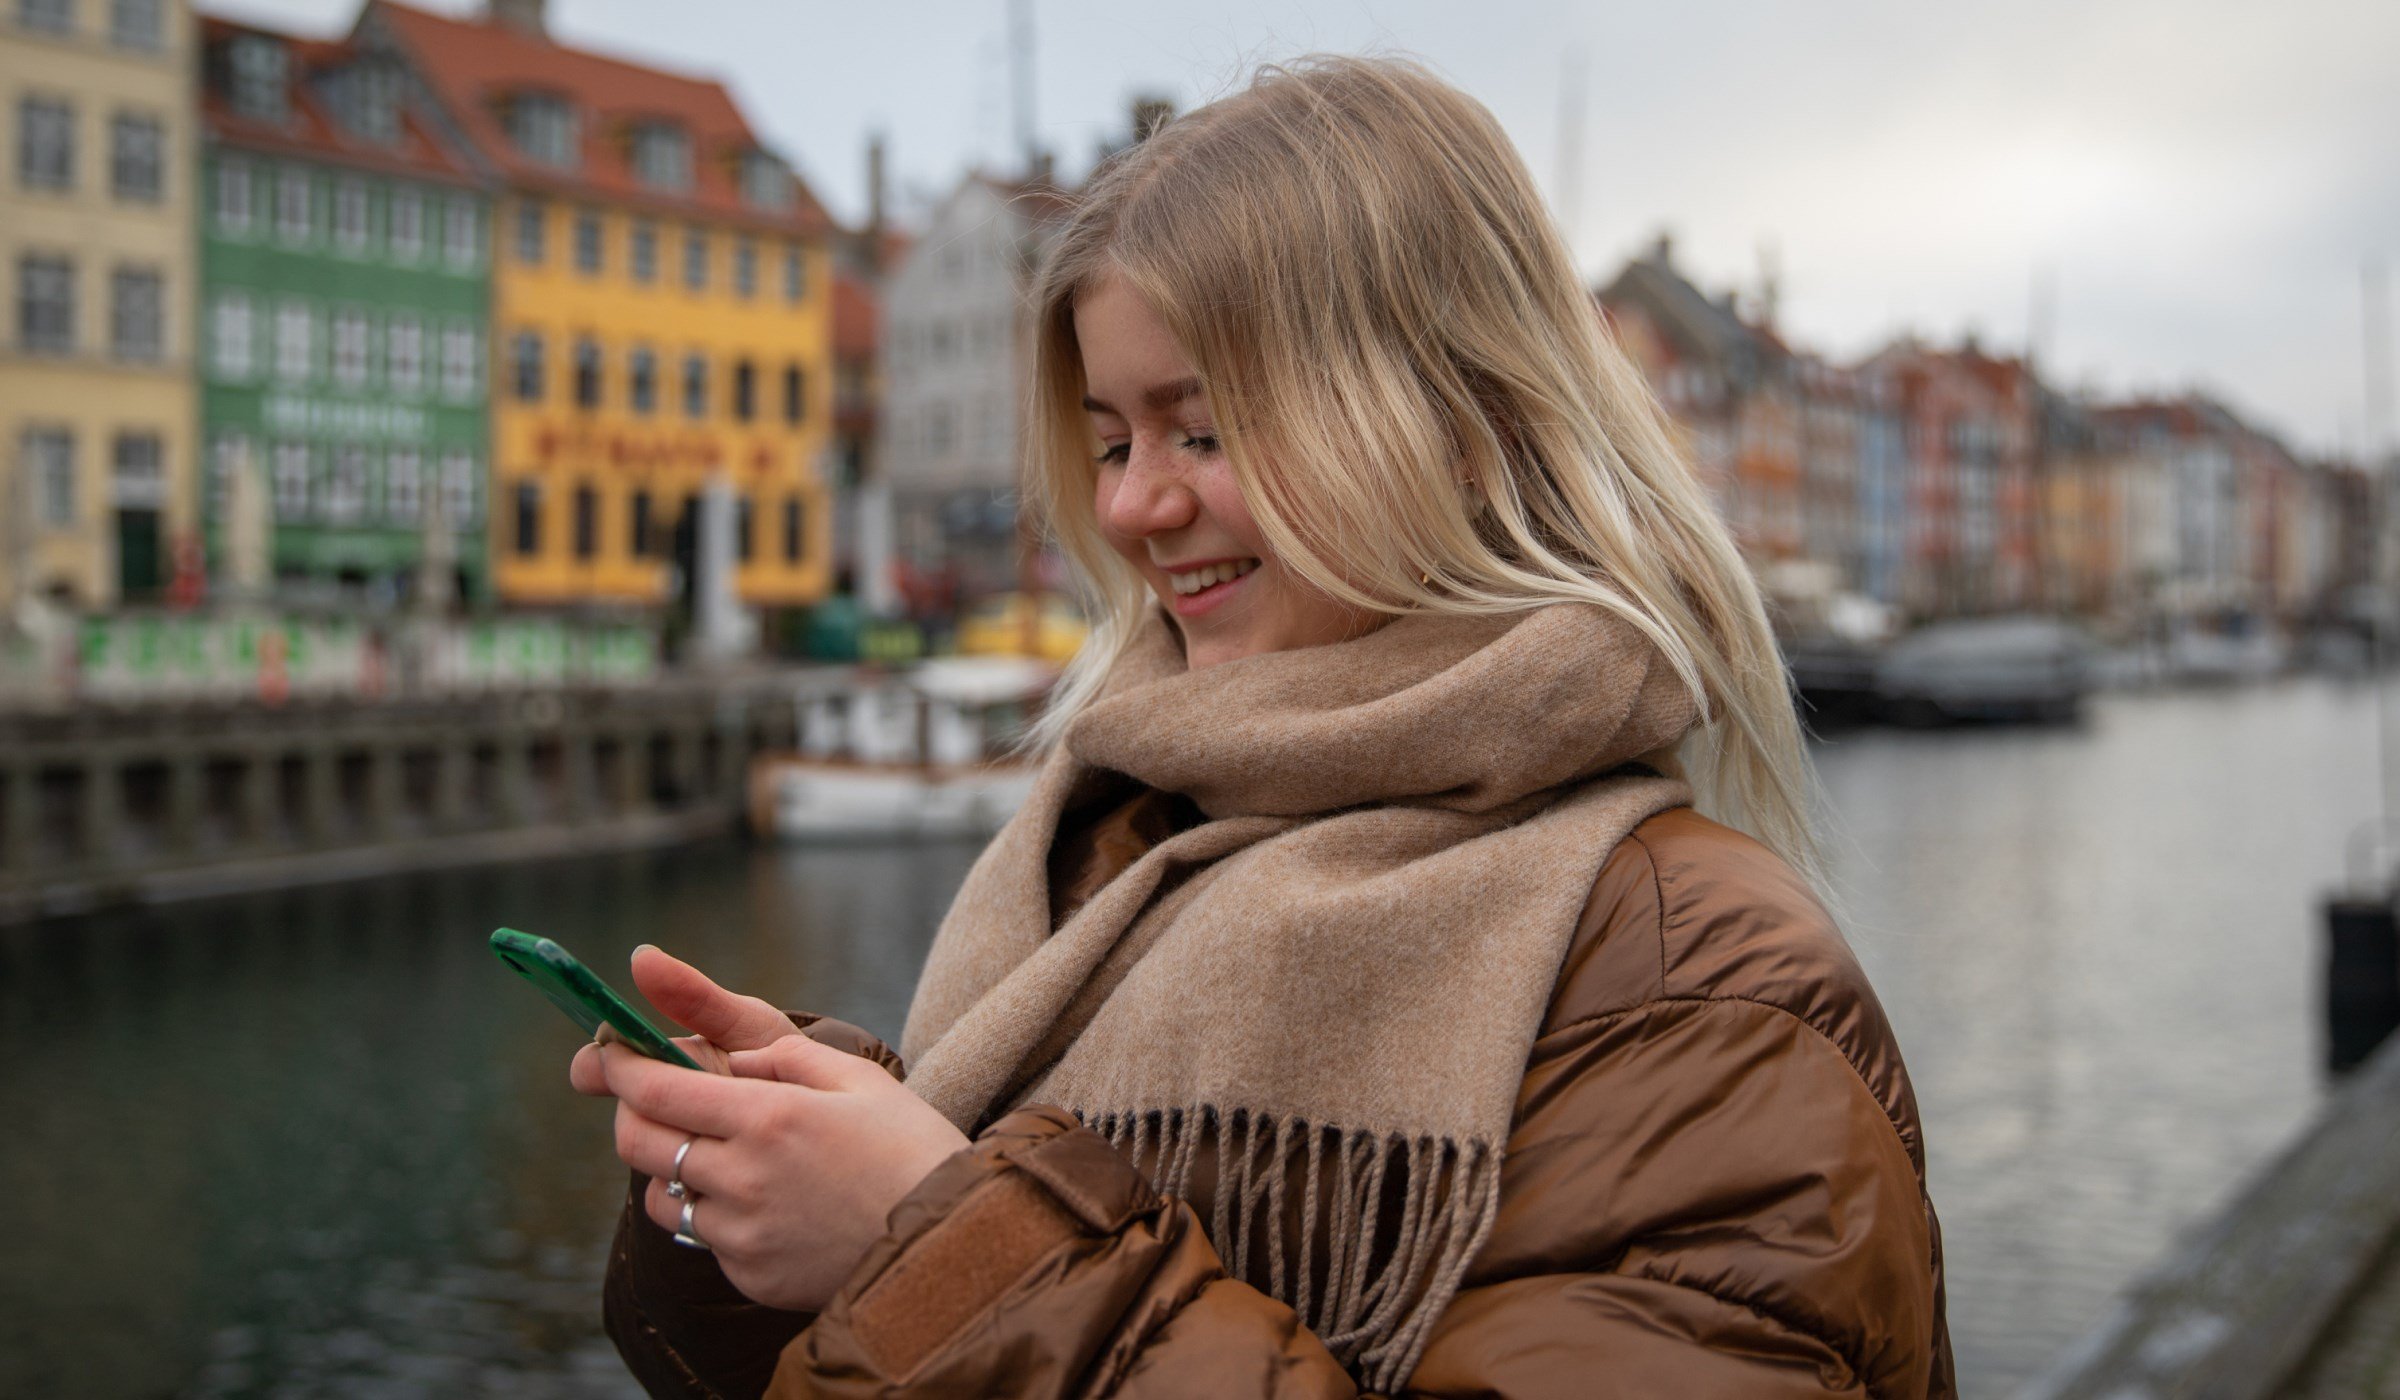 "Smiling woman using a smartphone by a colorful canal in Copenhagen